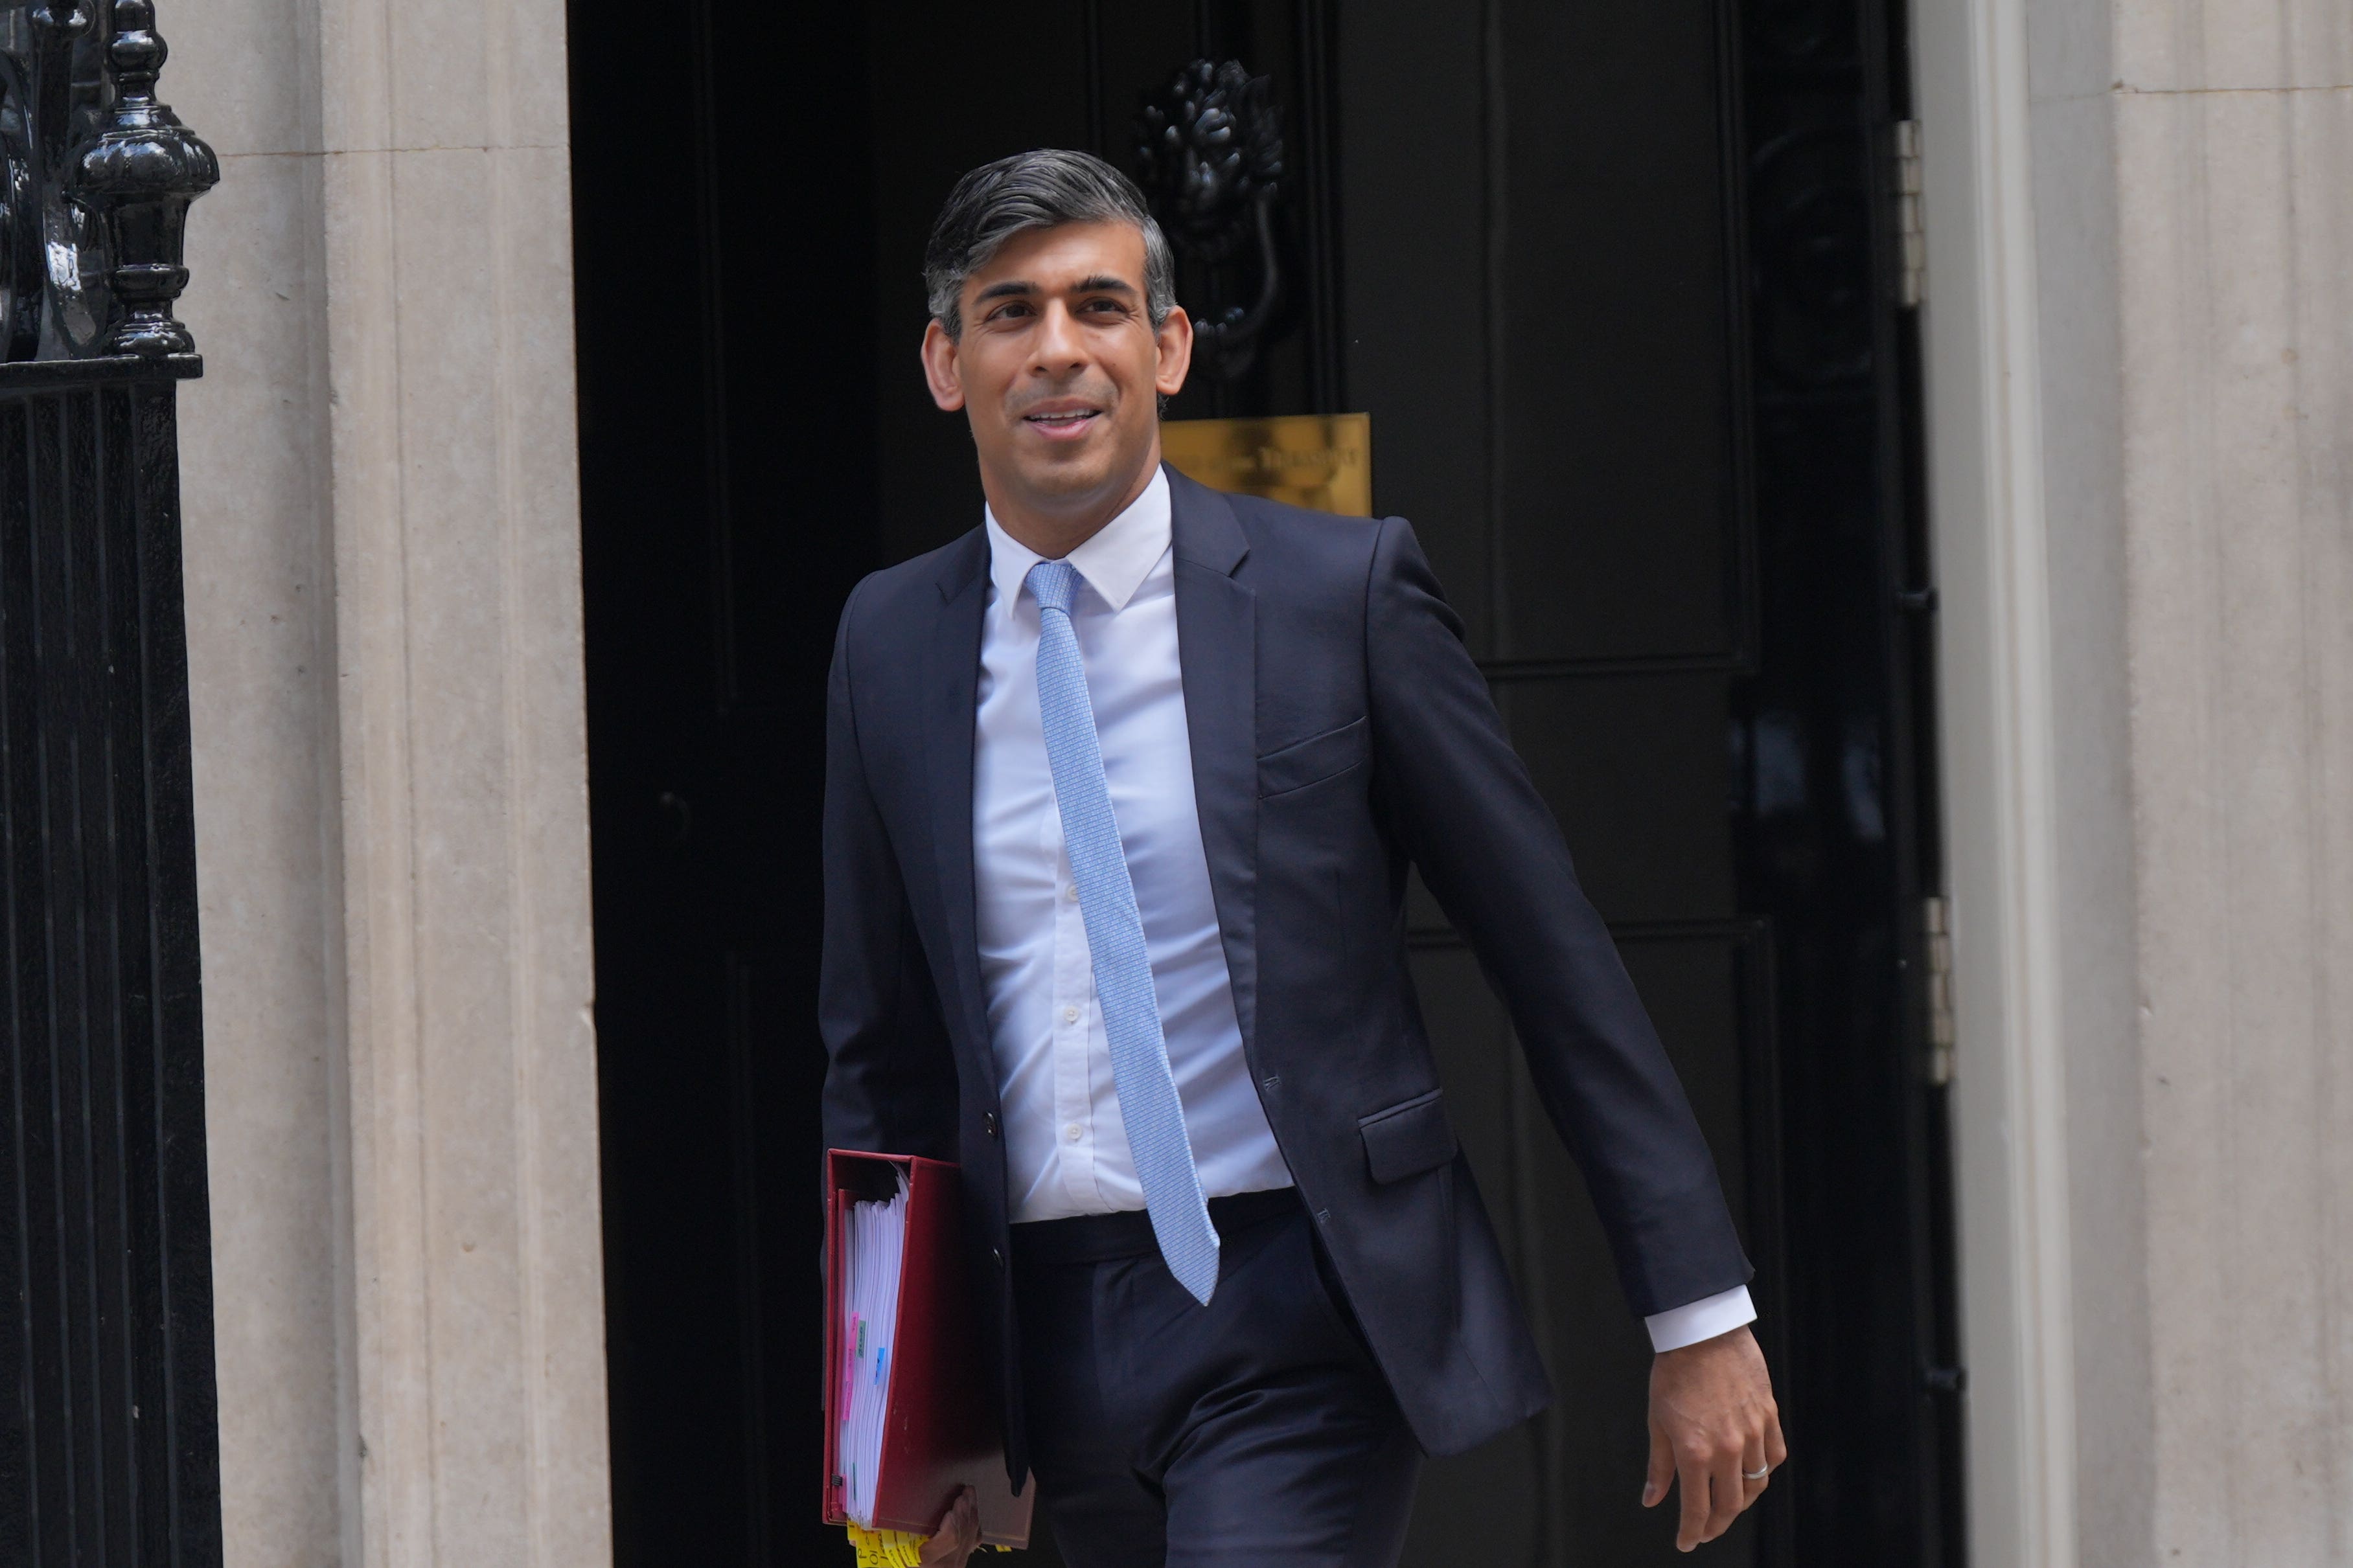 Prime Minister Rishi Sunak appears to be on his way out of 10 Downing Street (PA)